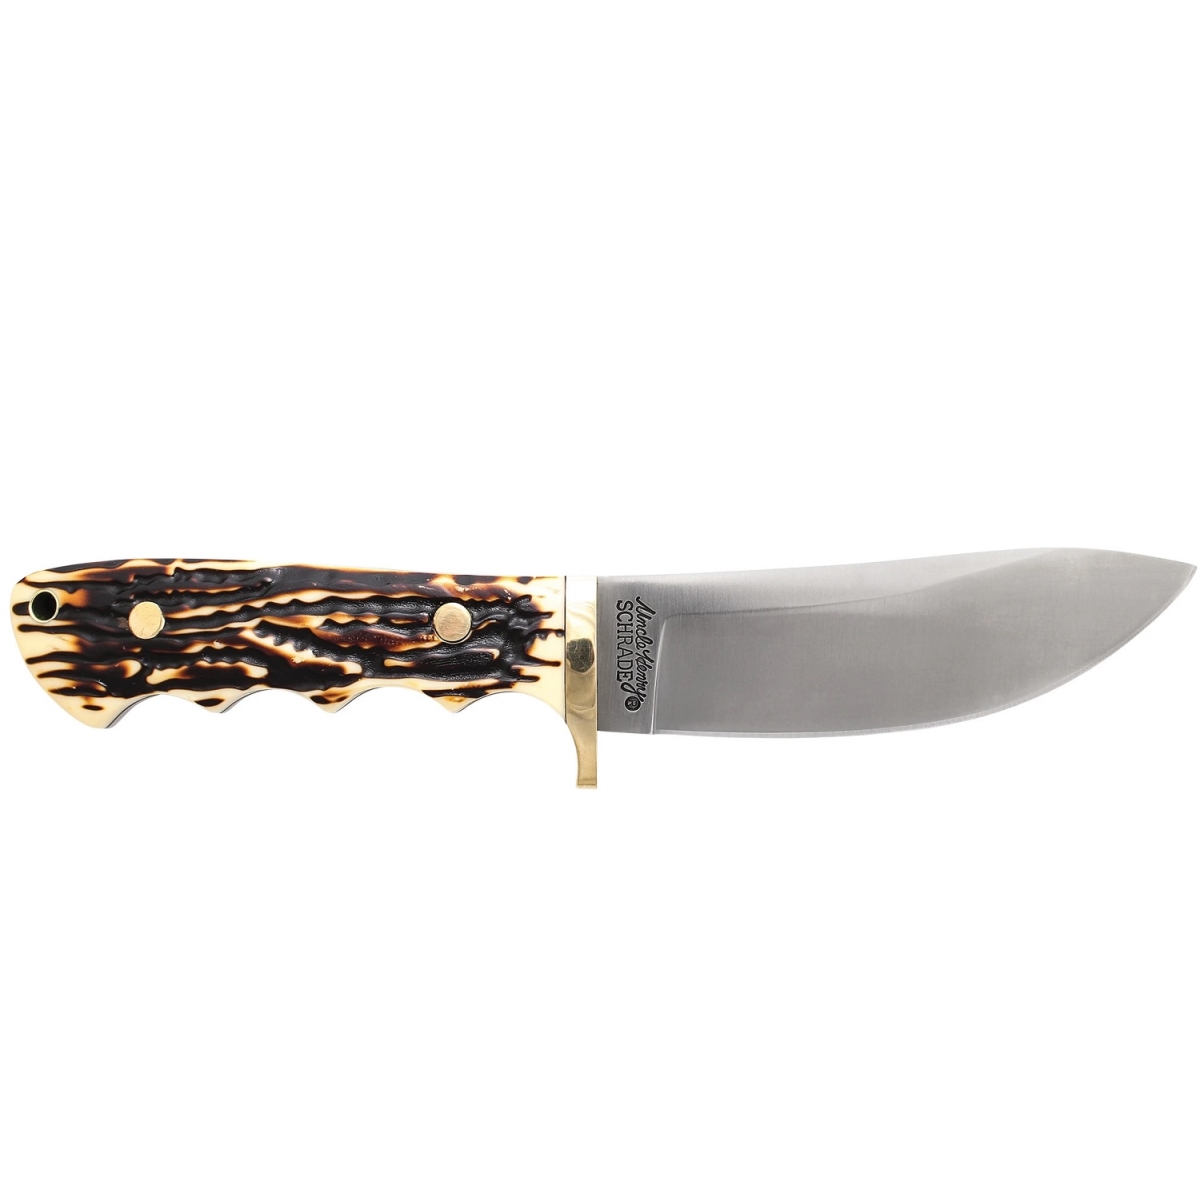 Uncle Henry 4020135 4.6 in. Next Gen Fixed Blade Staglon Handle Knife